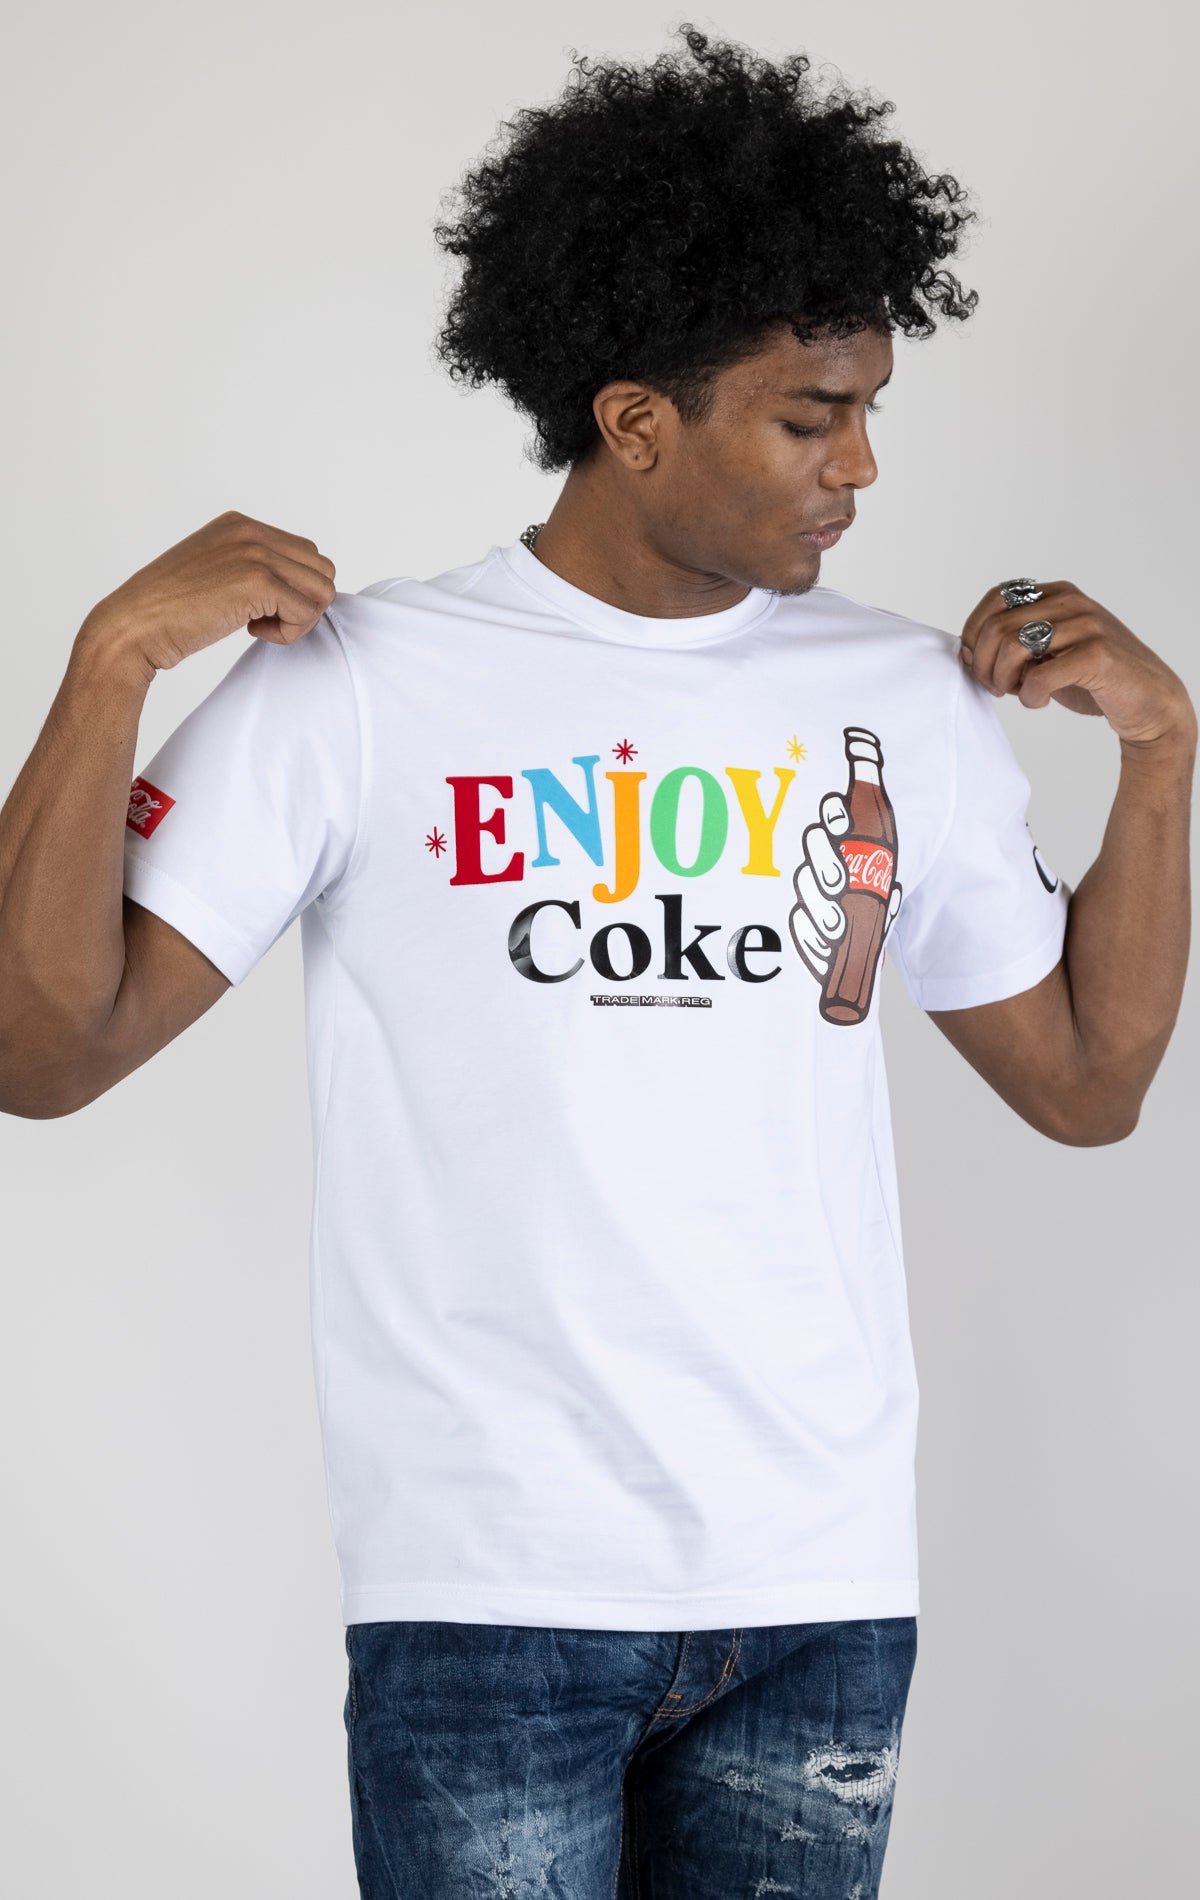 Men's white short-sleeve crew neck t-shirt in a variety of colors. The shirt features a Coca-Cola logo graphic on the front. The graphic is heat-sealed and the tee is made from a blend of 94% cotton and 6% spandex.